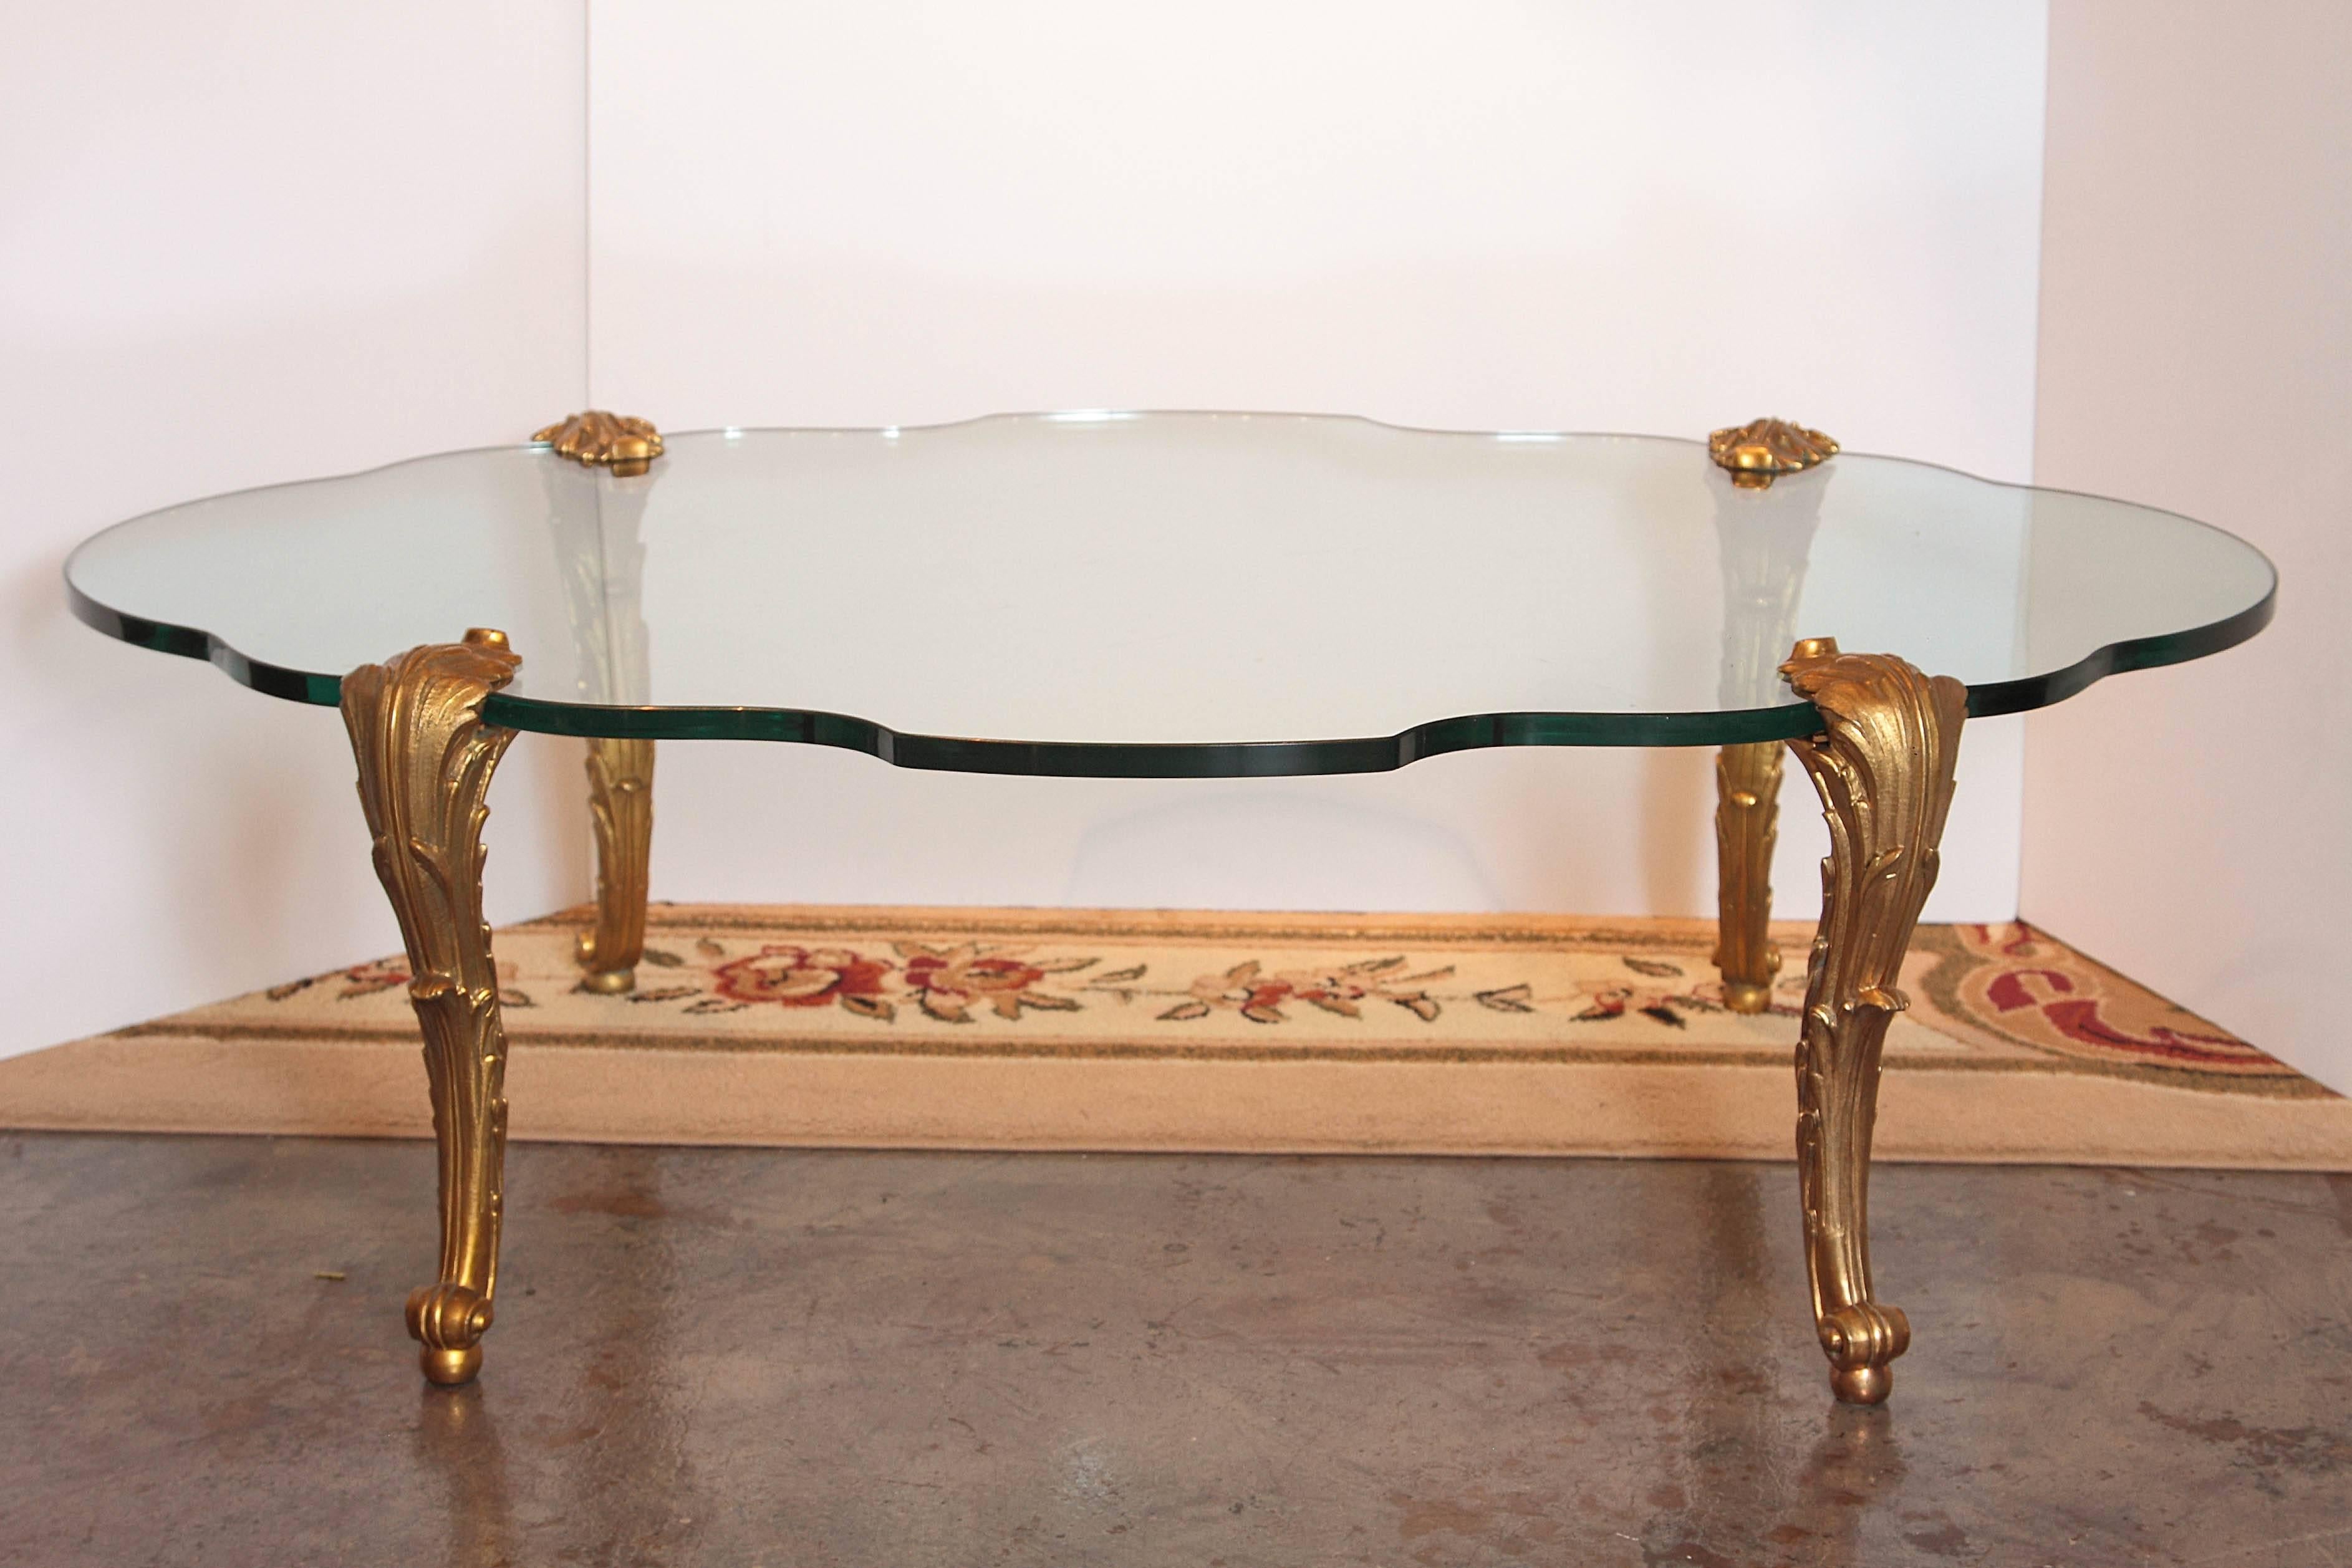 Mid-20th century French Louis XV gilt bronze four-legged glass top cocktail table. The legs signed P.E.Guerin. The table sales for $12,000.00 net from P.E.Guerin today.